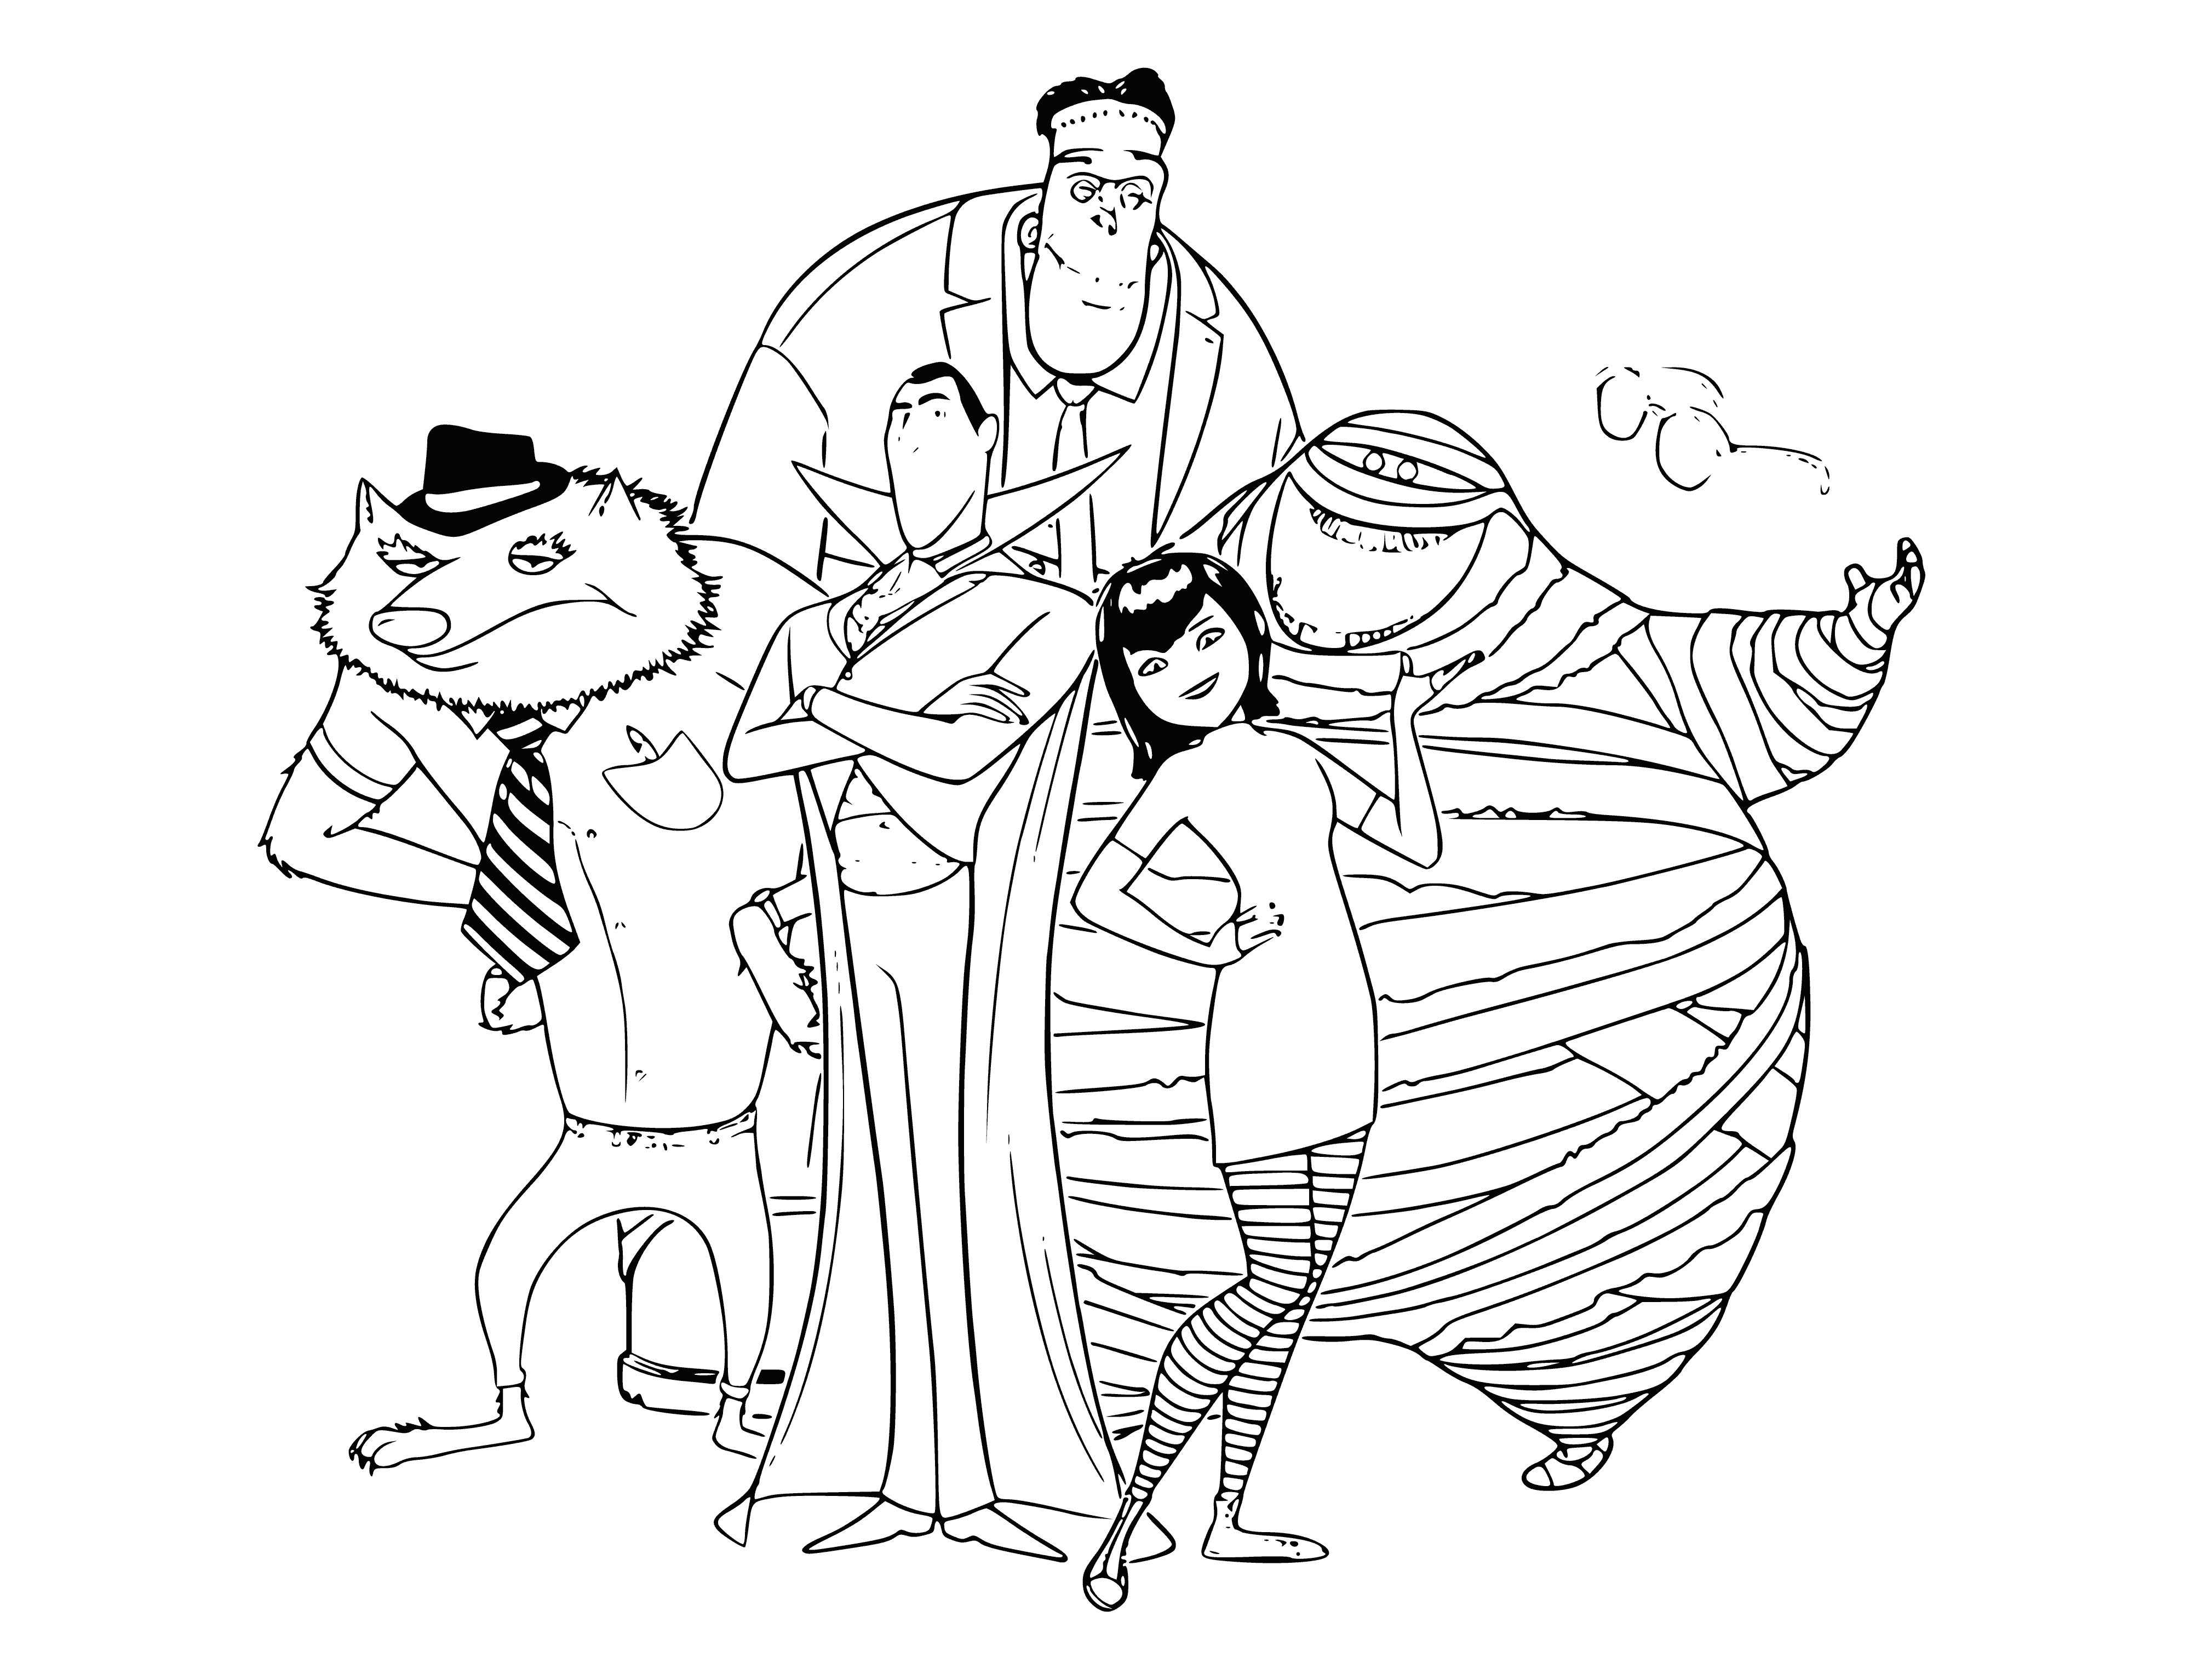 Monsters on vacation coloring page